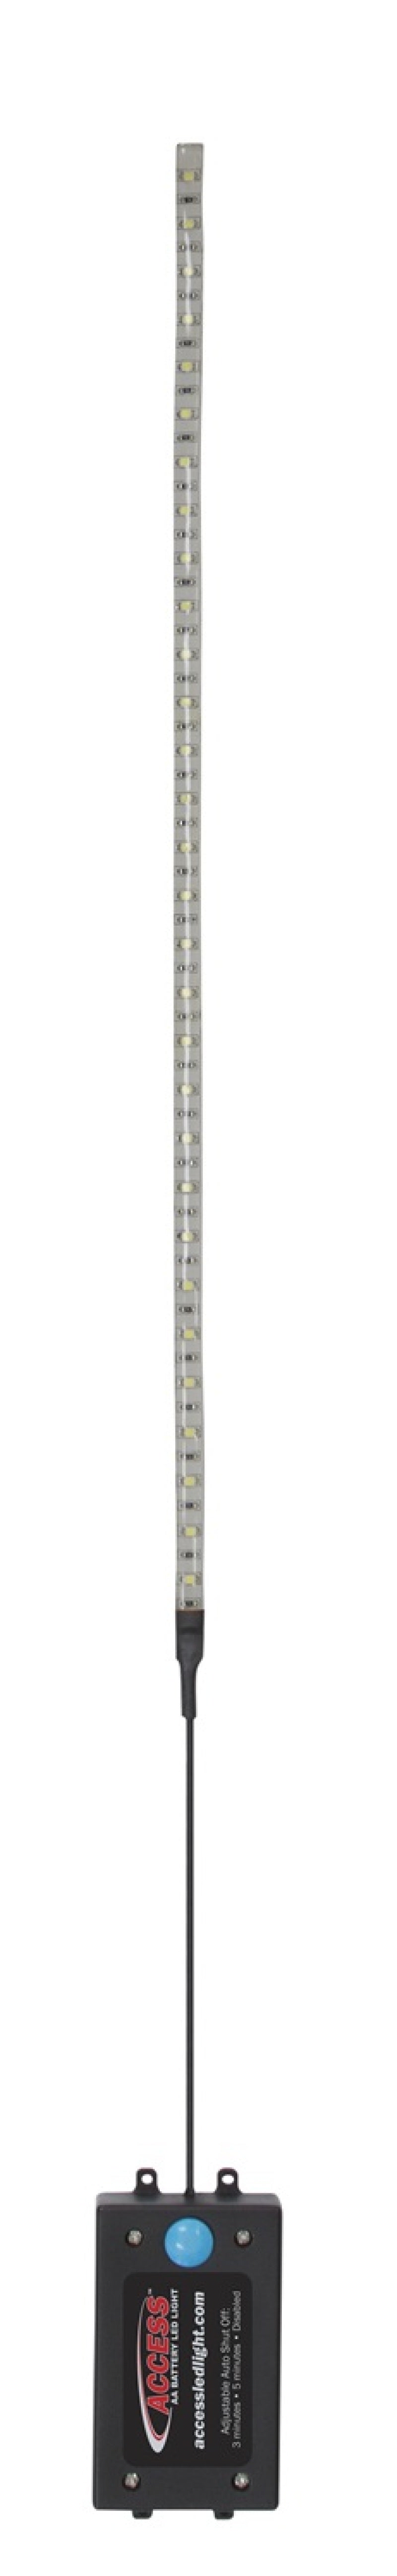 Access Accessories 39in LED Strip Light - 1 Single Pack